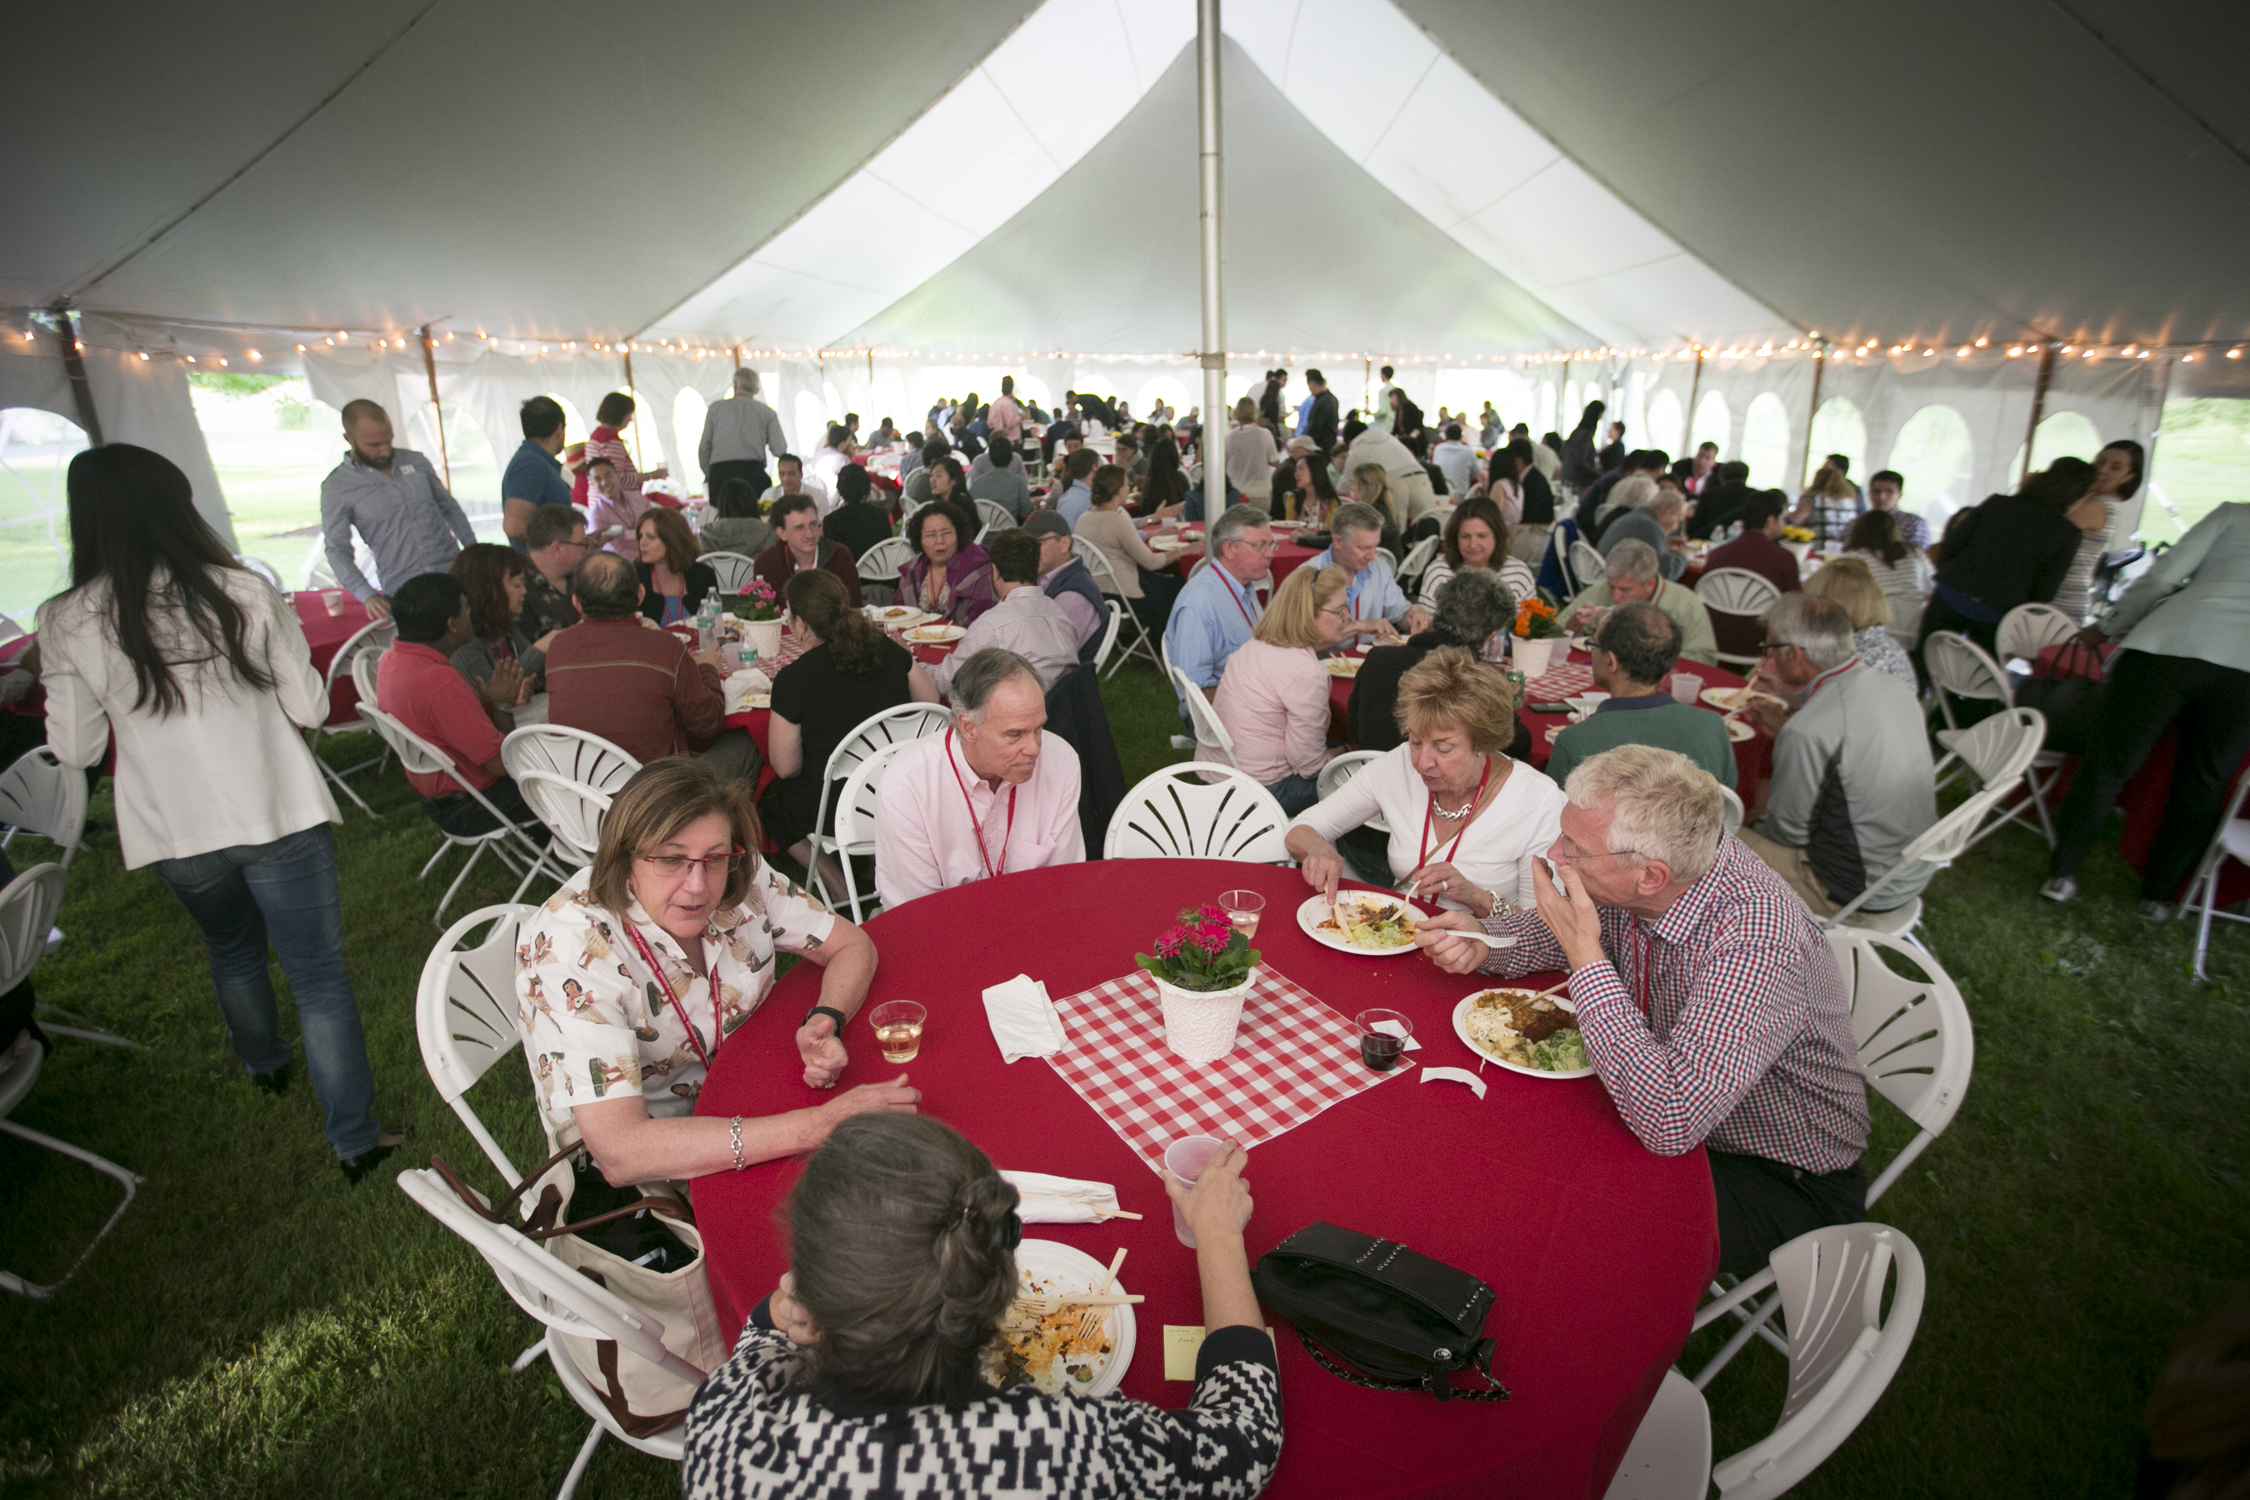 Seated diners in tent